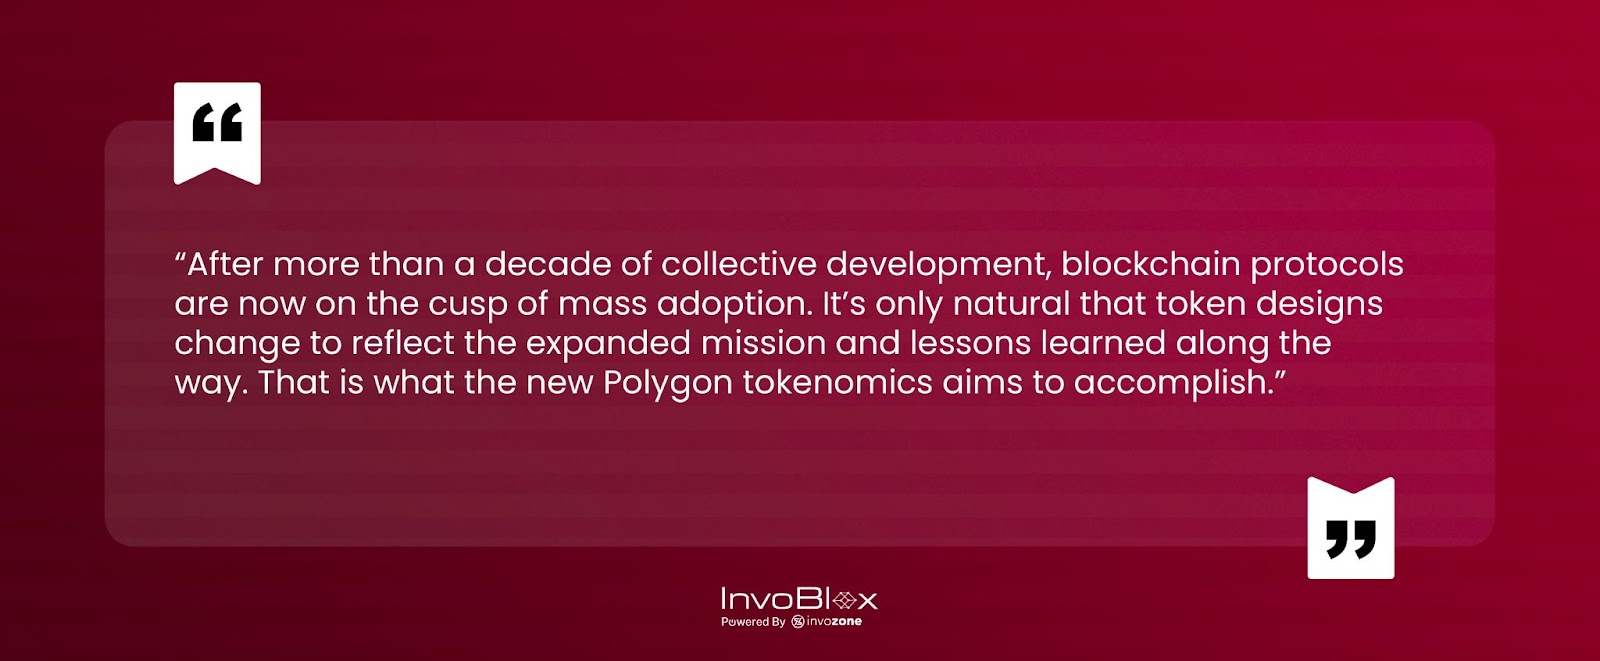 Polygon unlimited currently uses the Polygon PoS network protocol. Polygon 2.0 is working to pull off a consensus mechanism change and one on a Layer 2 chain.